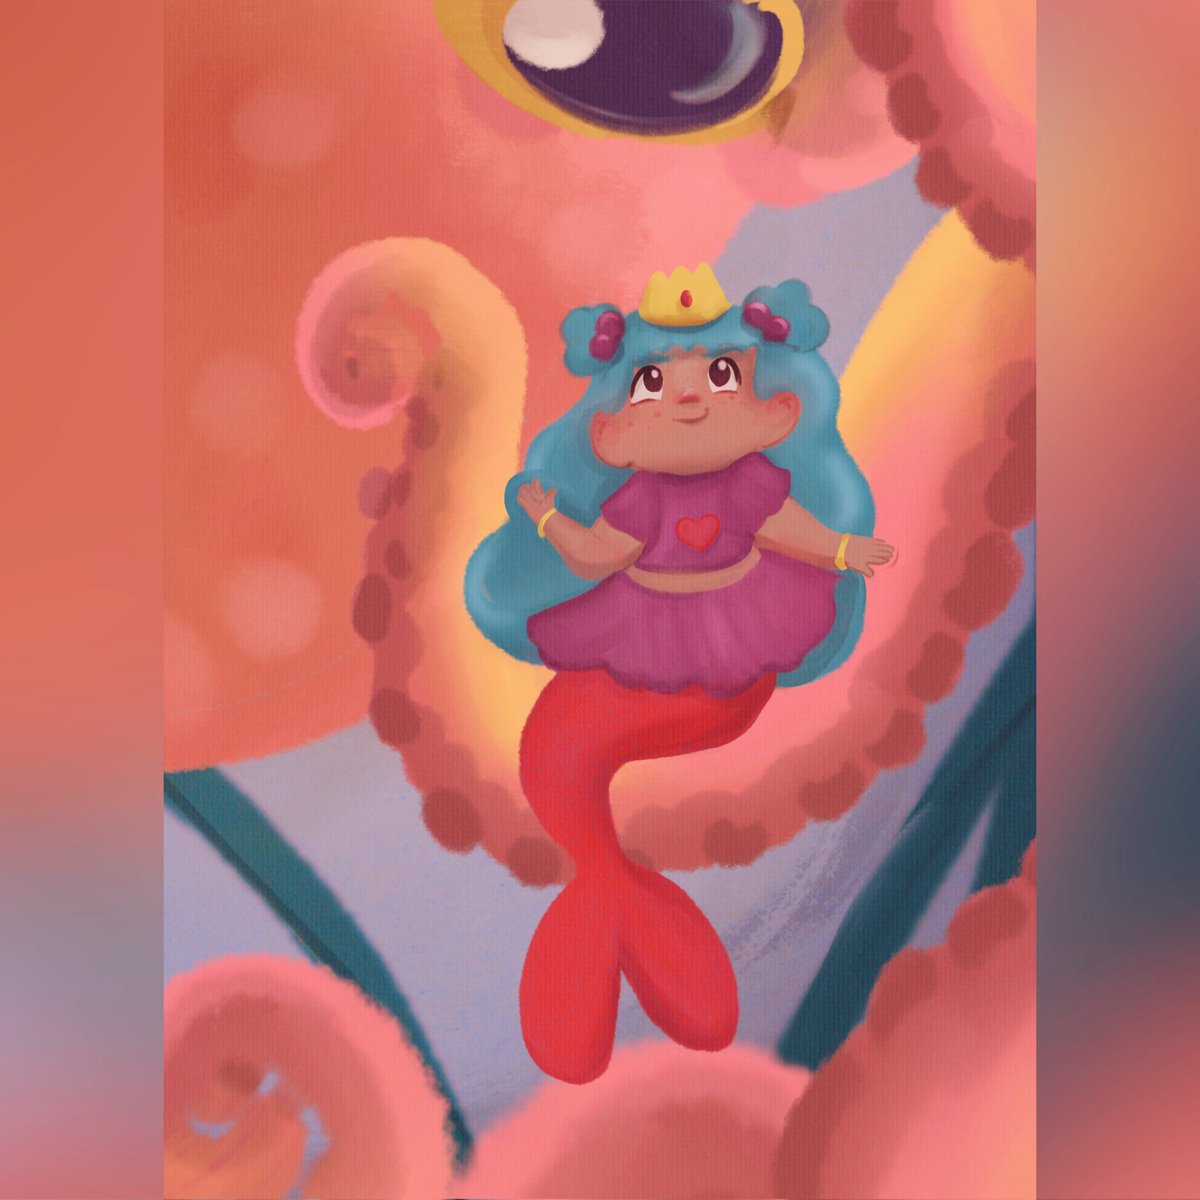 Lil mermaid princess having fun with her friend the giant octopus✨️
•
I loved playing with colors and different brushes 🎨 wishing I had a giant octopus friend now...✨️
#levydoodles #sirenita #artist #procreate #princessa #mermaid #illustration  #octopus #childrensbookart